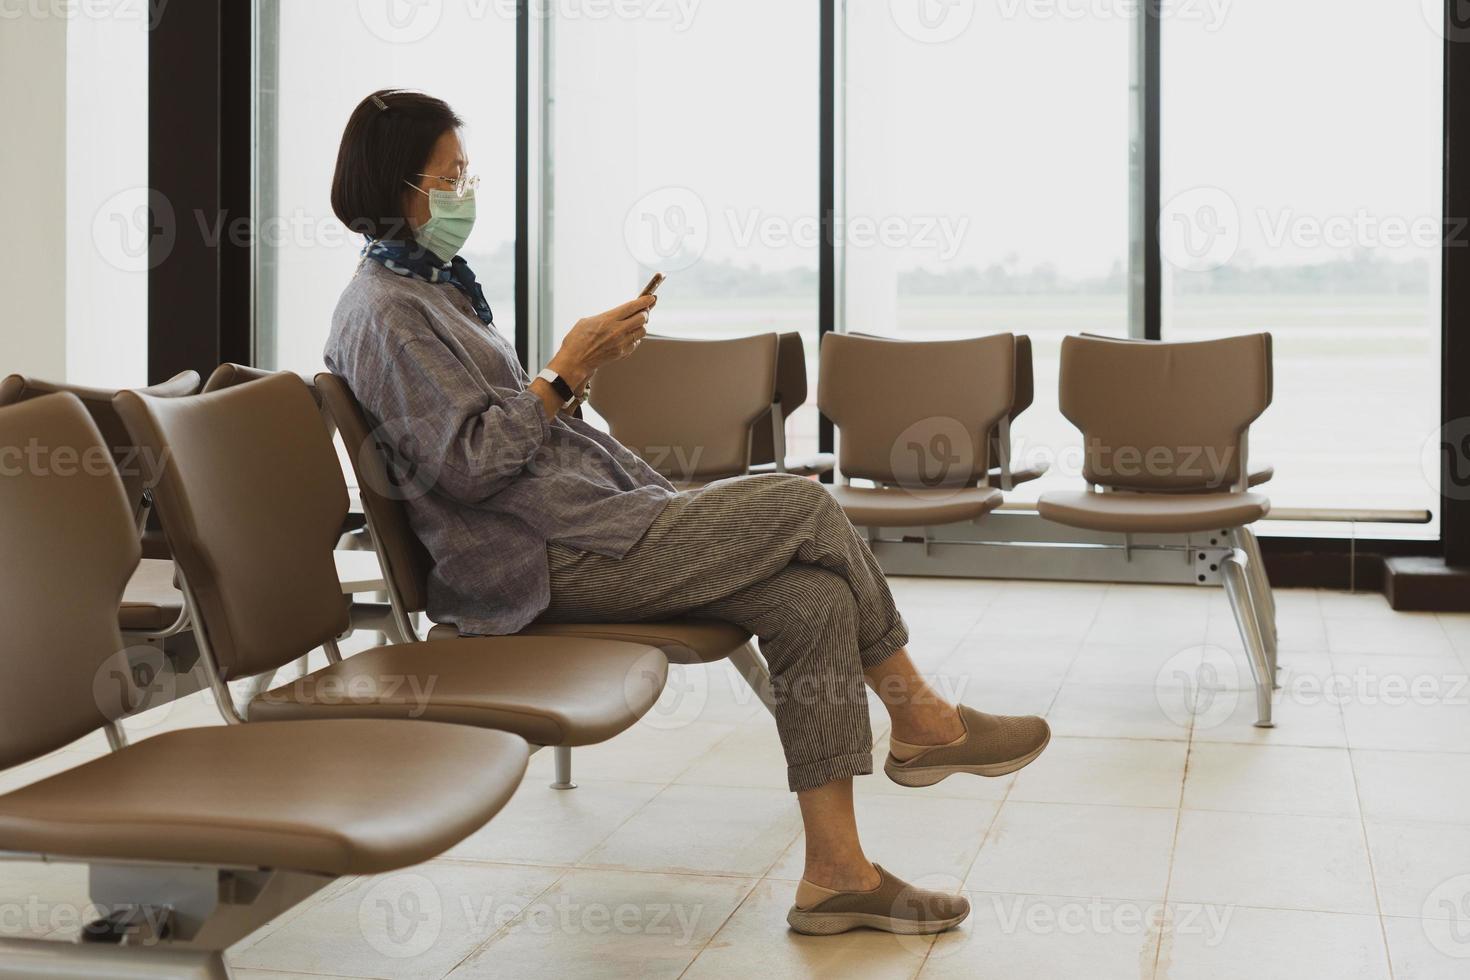 Masked woman sitting in airport photo